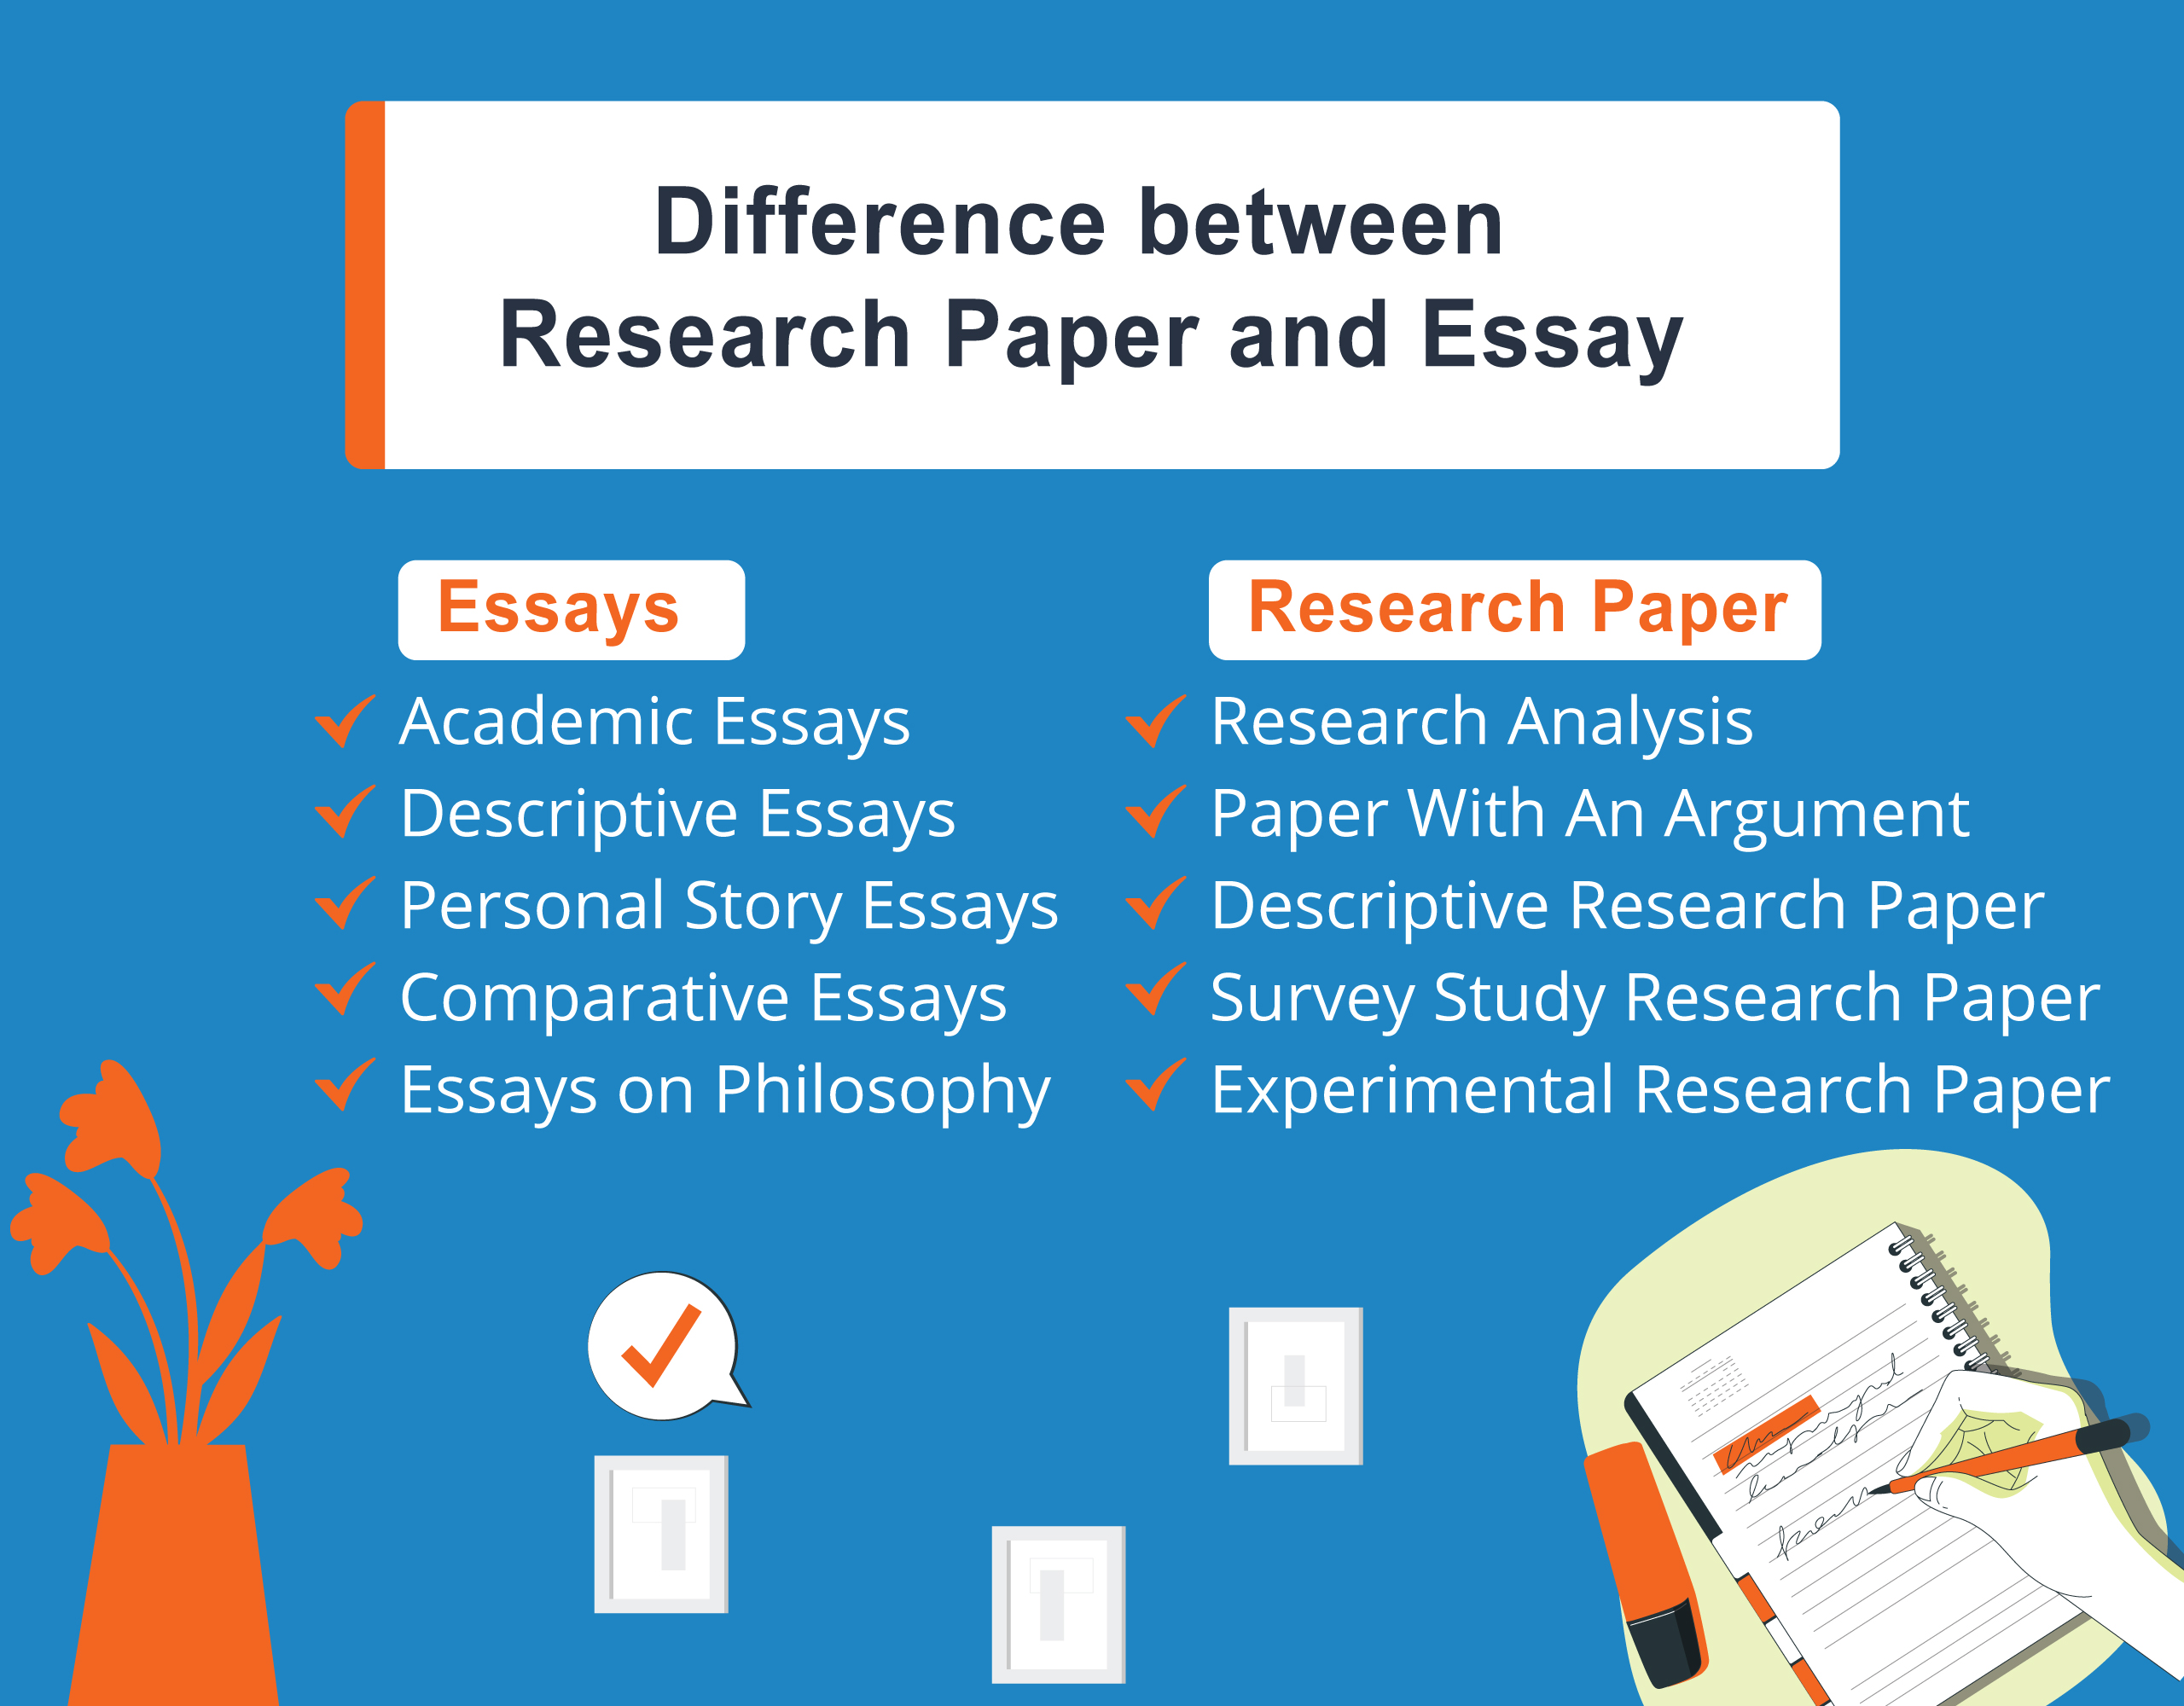 Difference between Research Paper and Essay